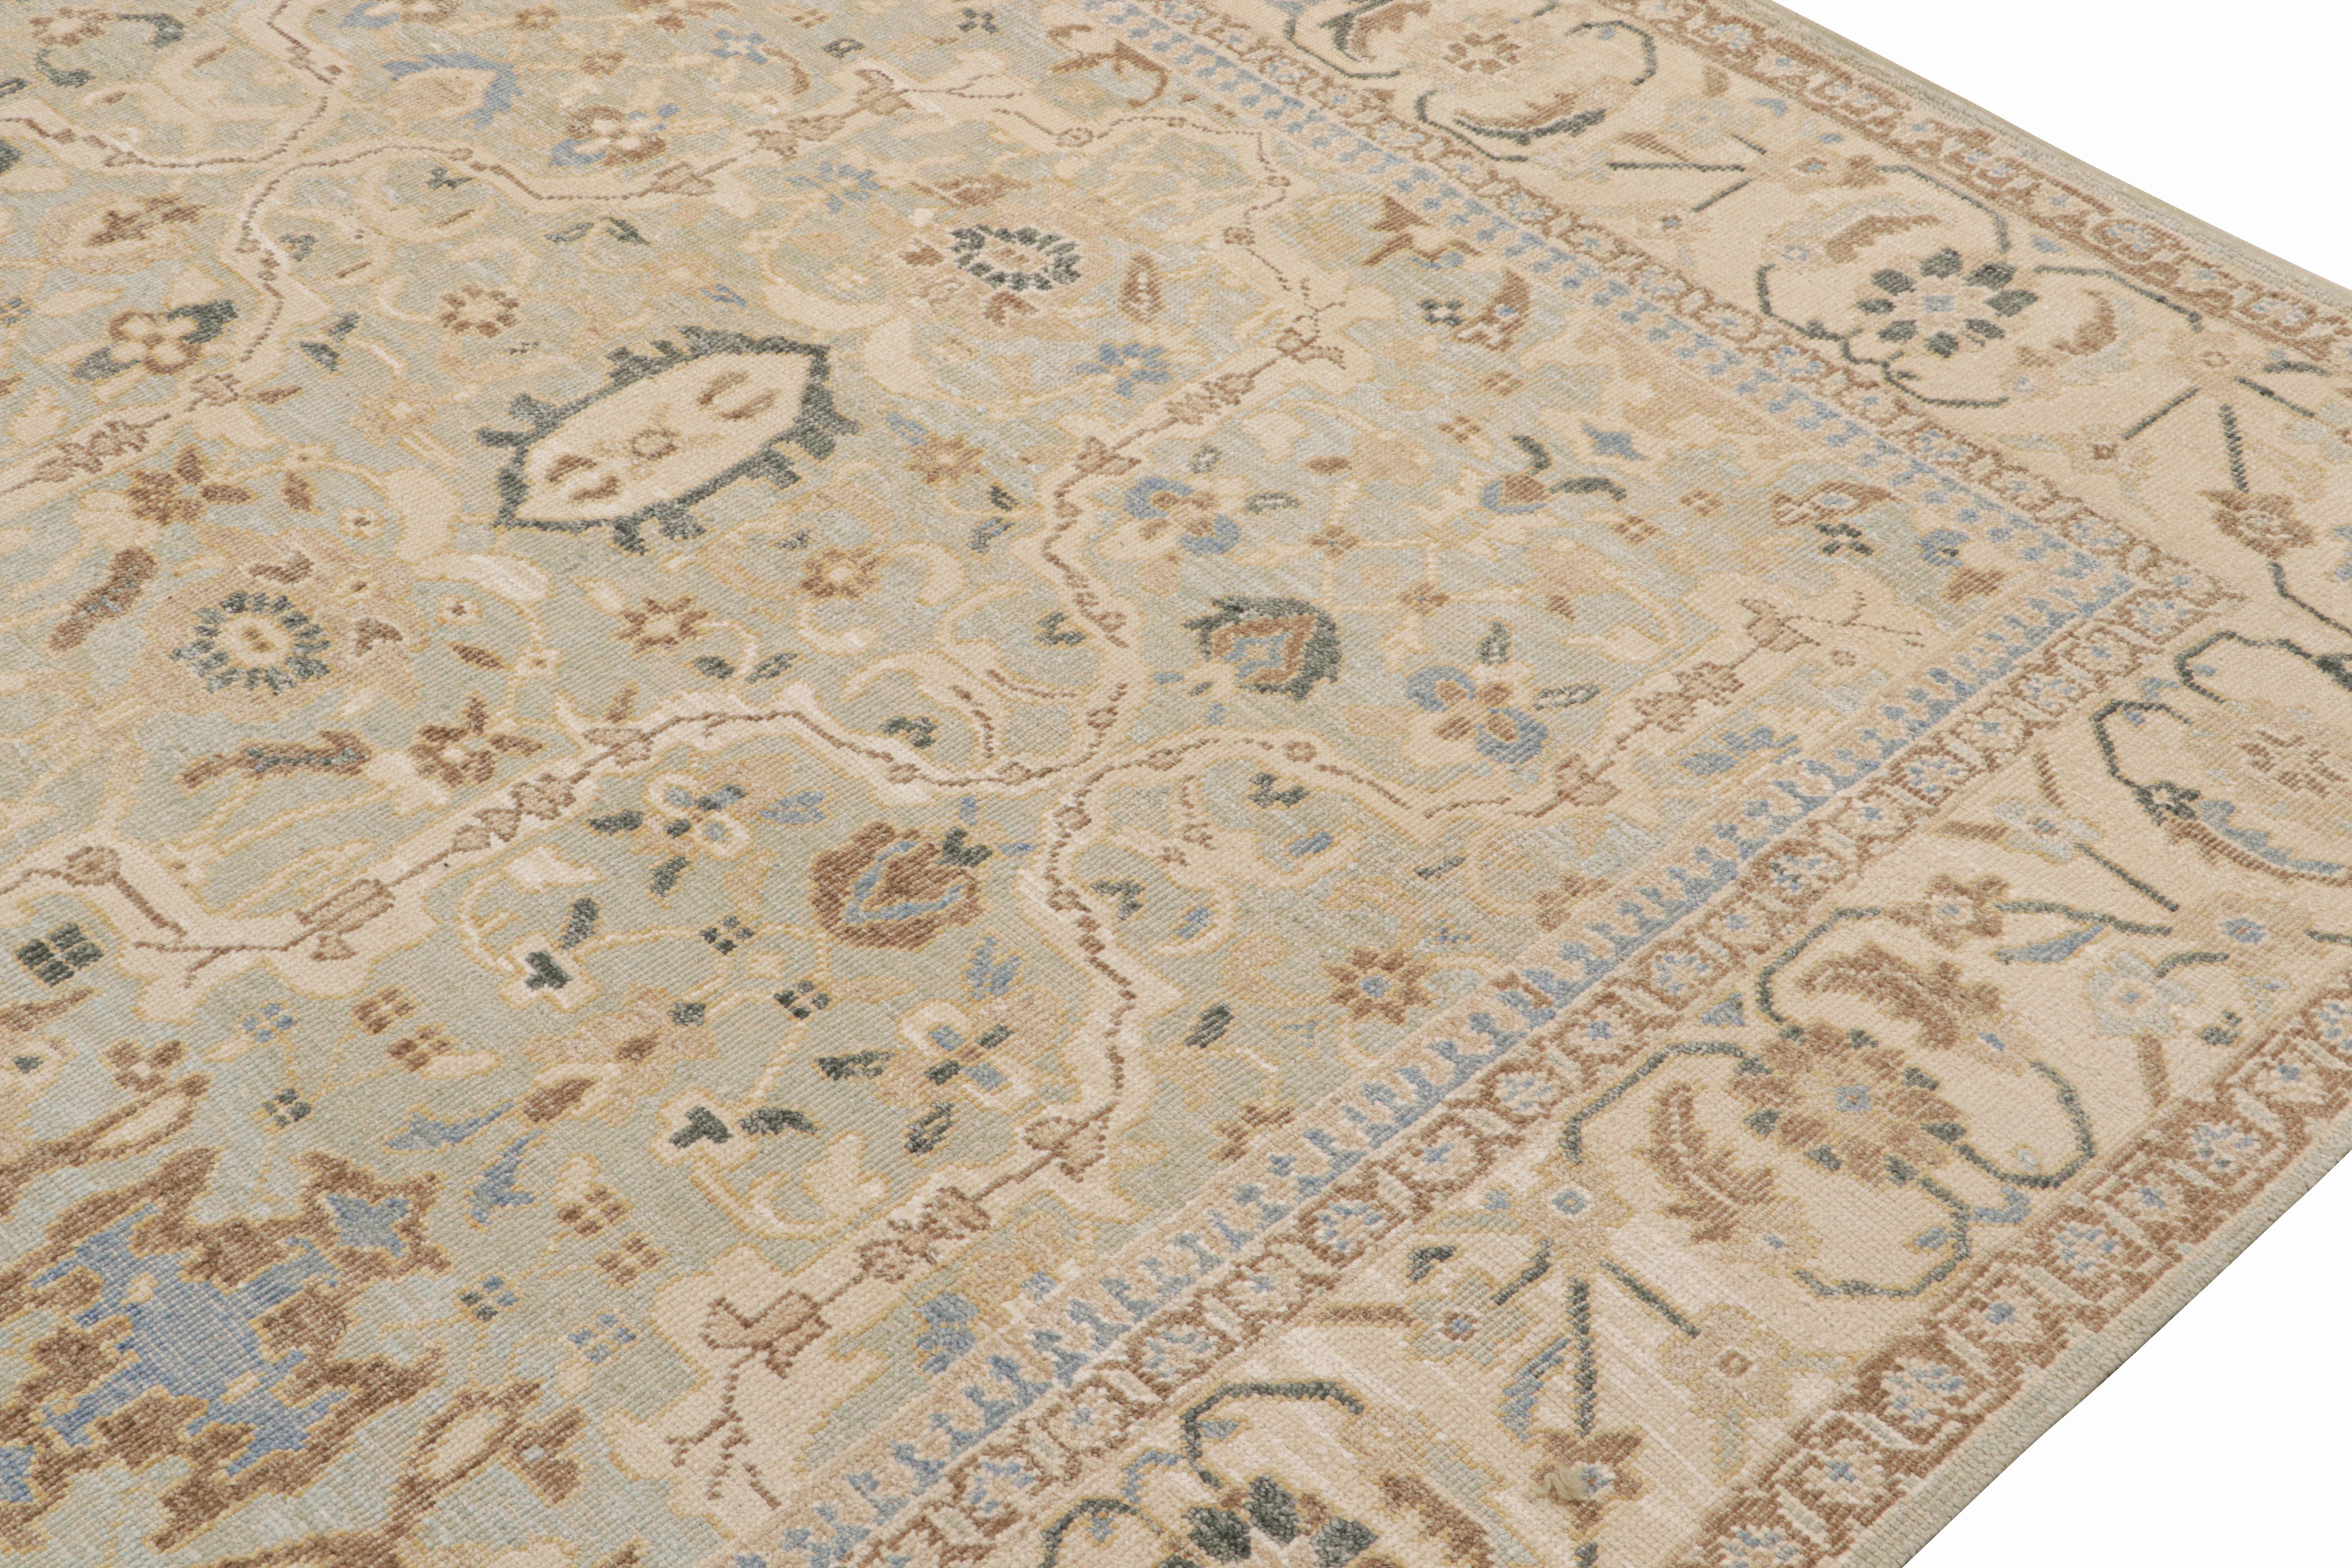 Rug & Kilim’s Oushak Style Rug in Blue and Beige-Brown Floral Patterns In New Condition For Sale In Long Island City, NY